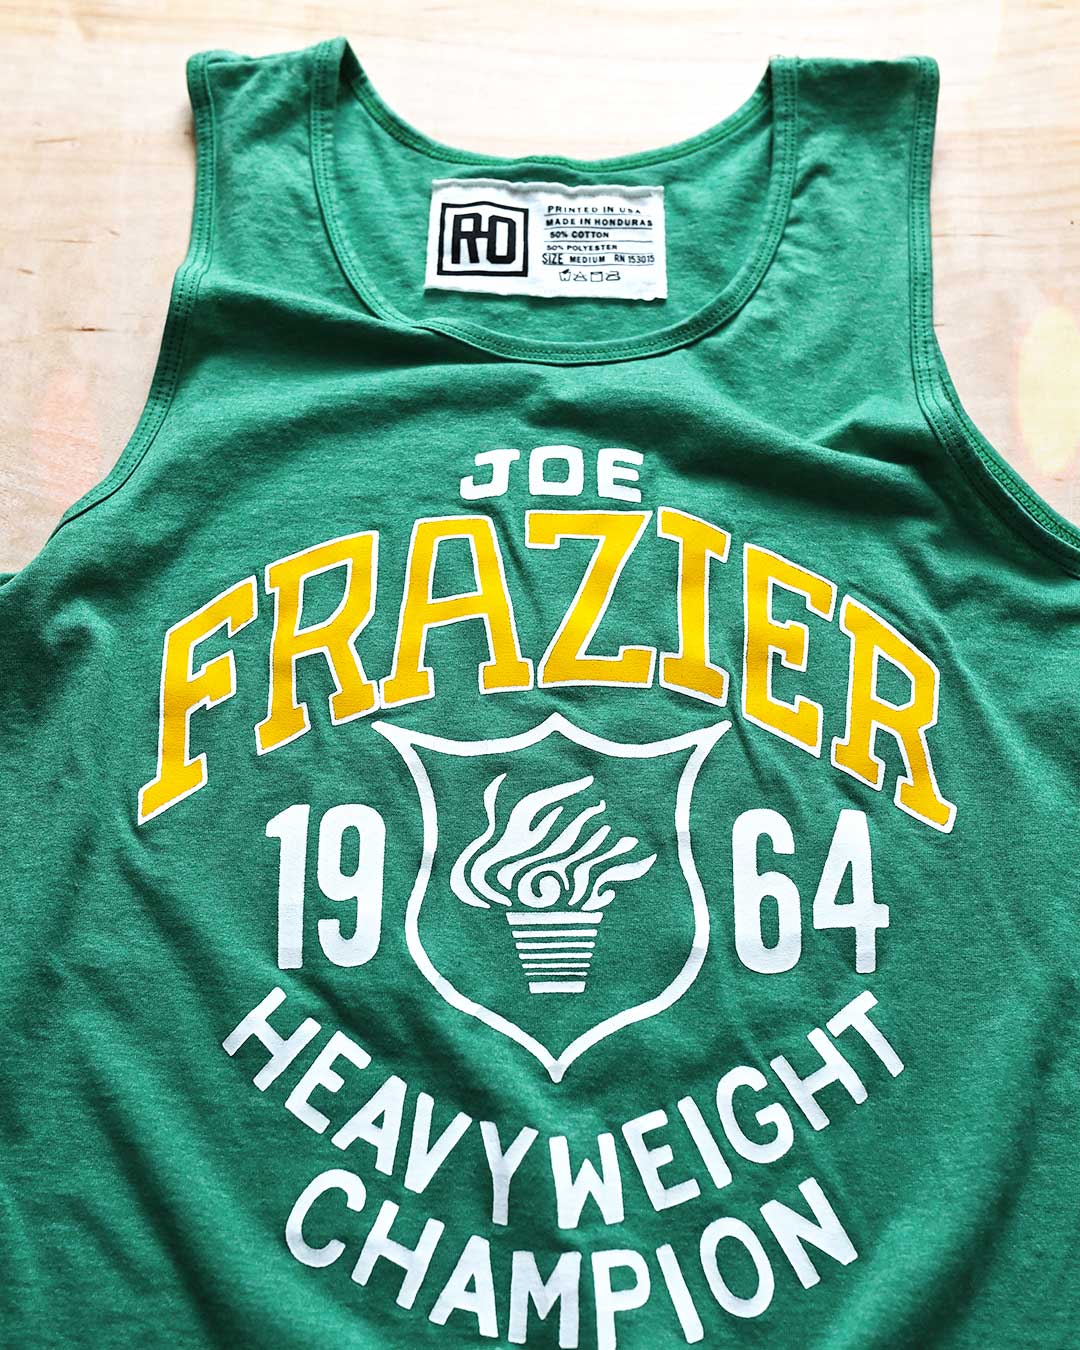 Frazier 1964 Champ Green Tank - Roots of Fight